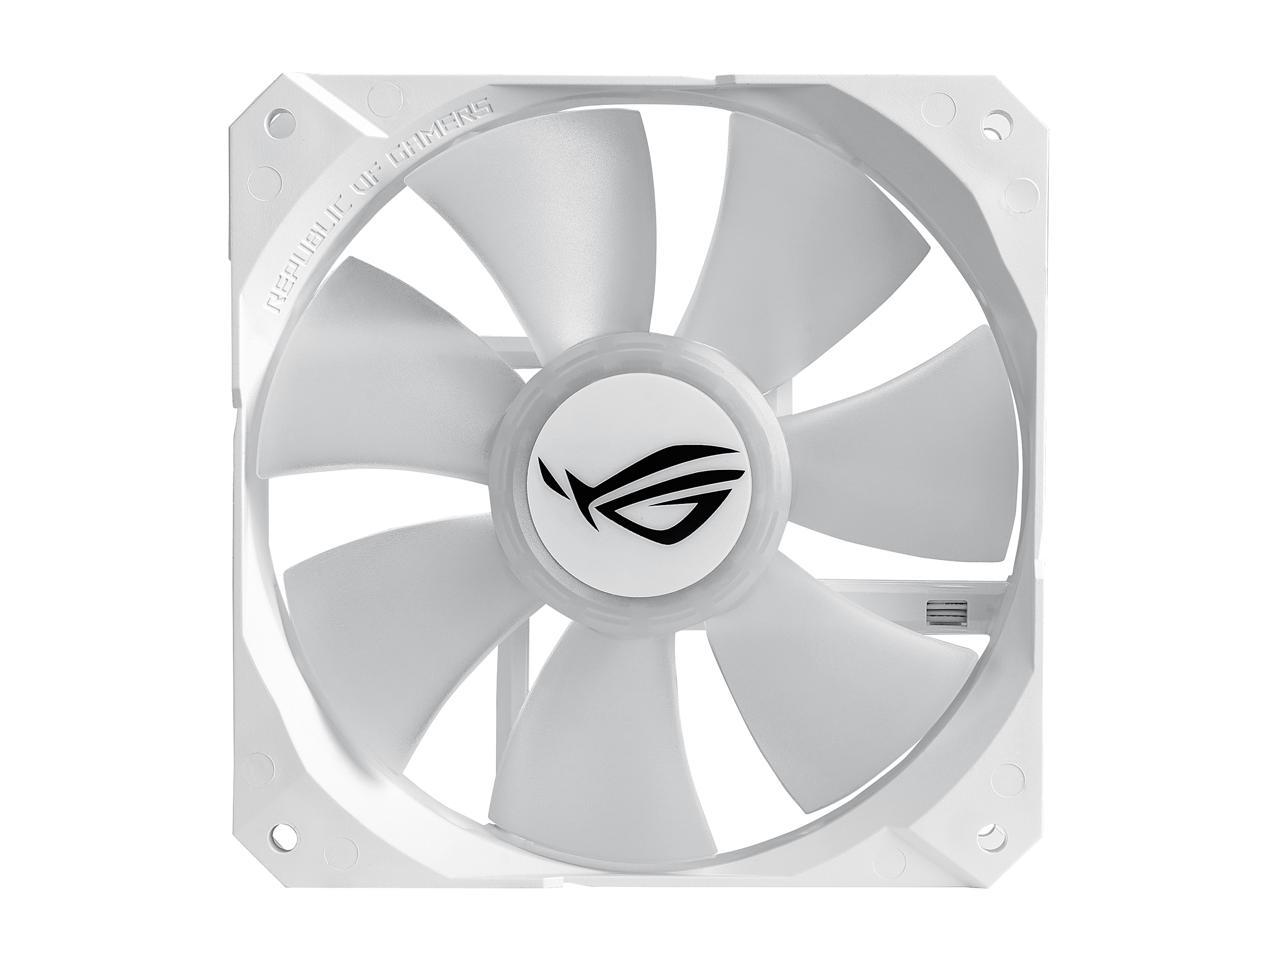 Asus Rog Strix Lc 240 Rgb White Edition All-In-One Liquid Cpu Cooler With Aura Sync Rgb, And Dual Rog 120Mm Addressable Rgb Radiator Fans